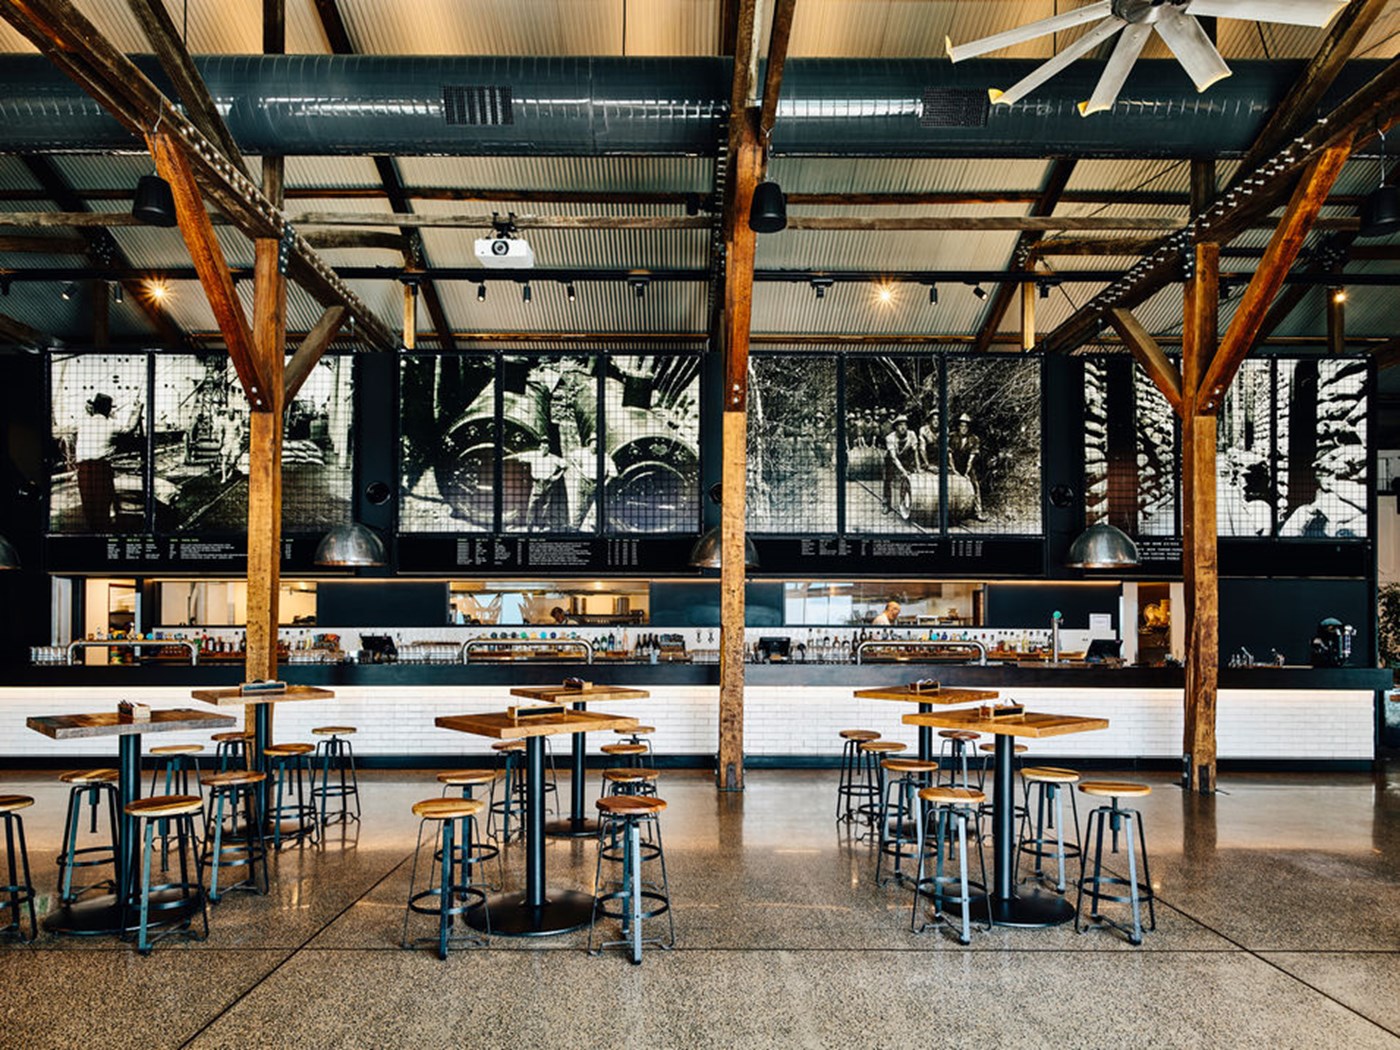 An industrial style brewery interior with brown tables and exposed wooden beams.